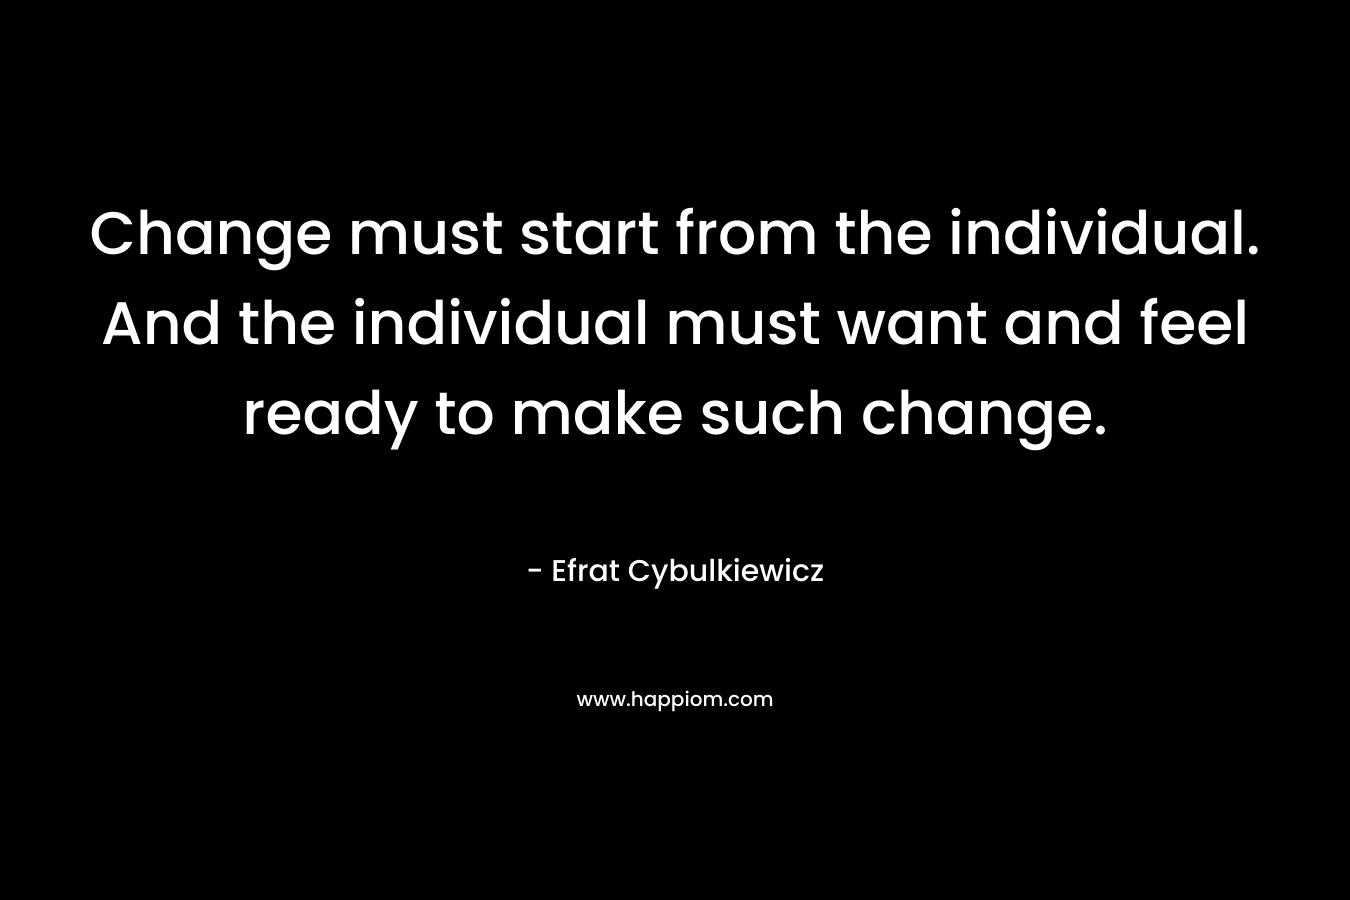 Change must start from the individual. And the individual must want and feel ready to make such change.